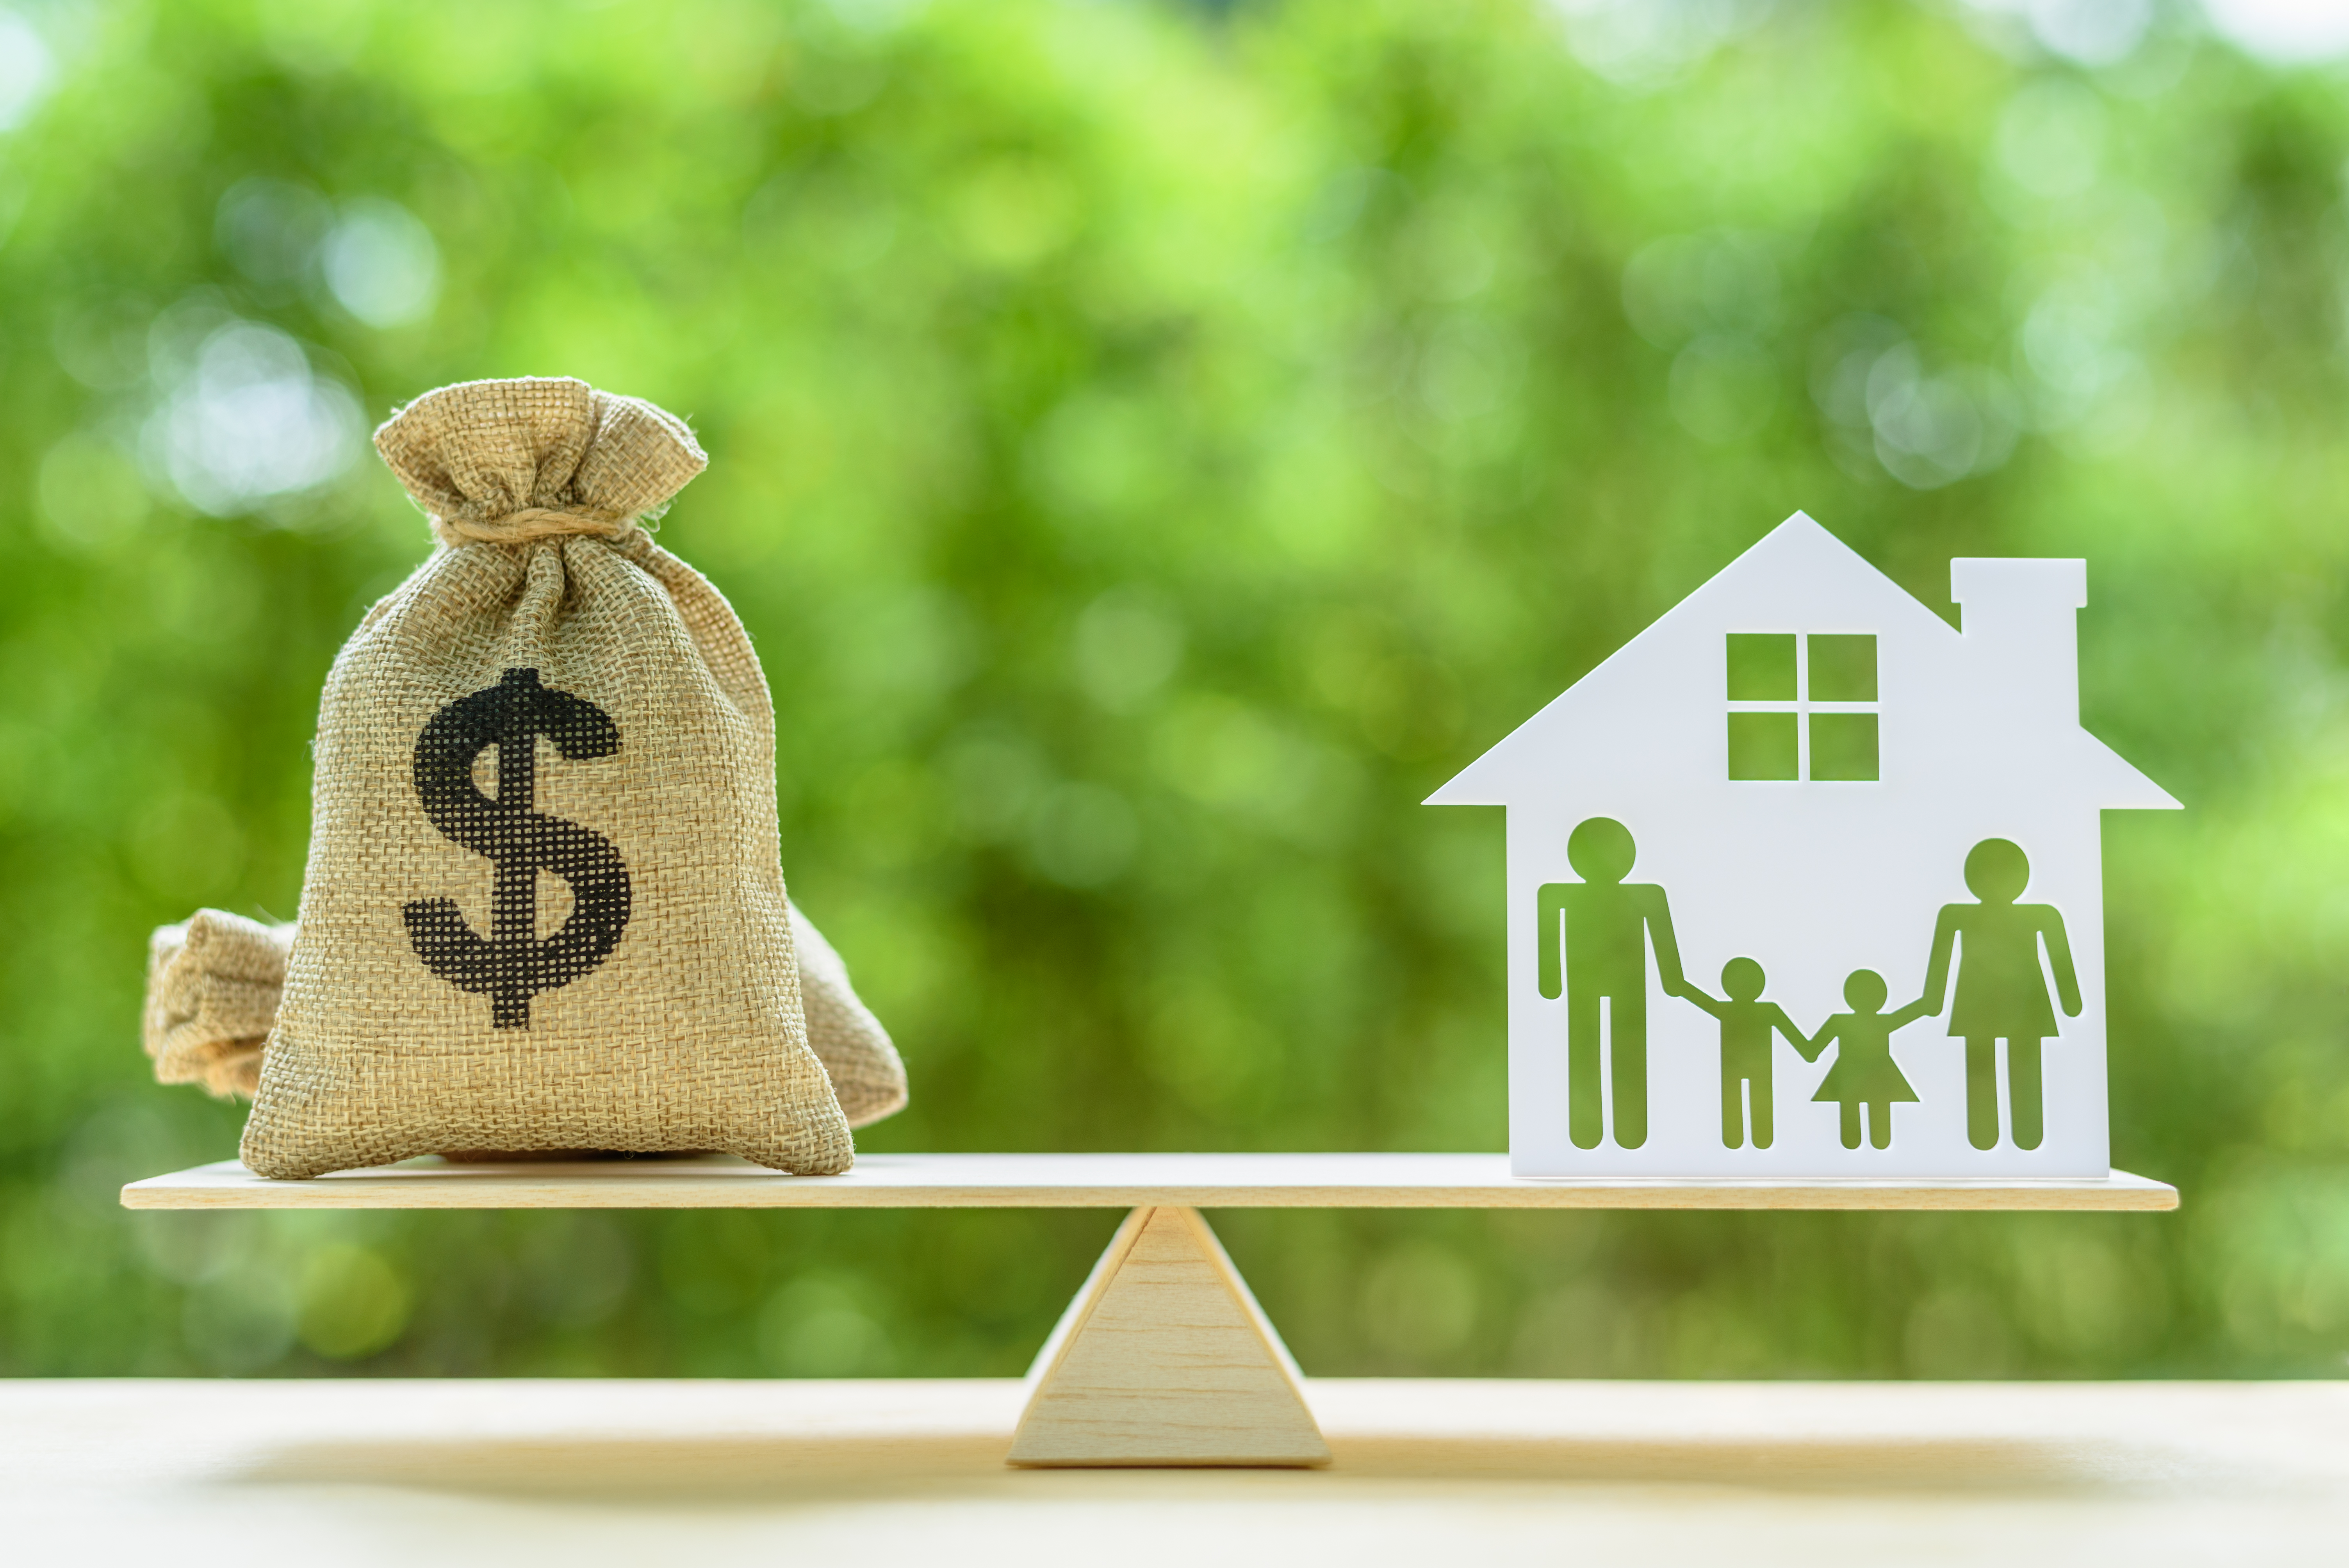 Family financial management, mortgage and payday loan or cash advance concept : Dollar bags, 4 members family under a house or shelter on a balance scale, depicts short term borrowing for a residence.